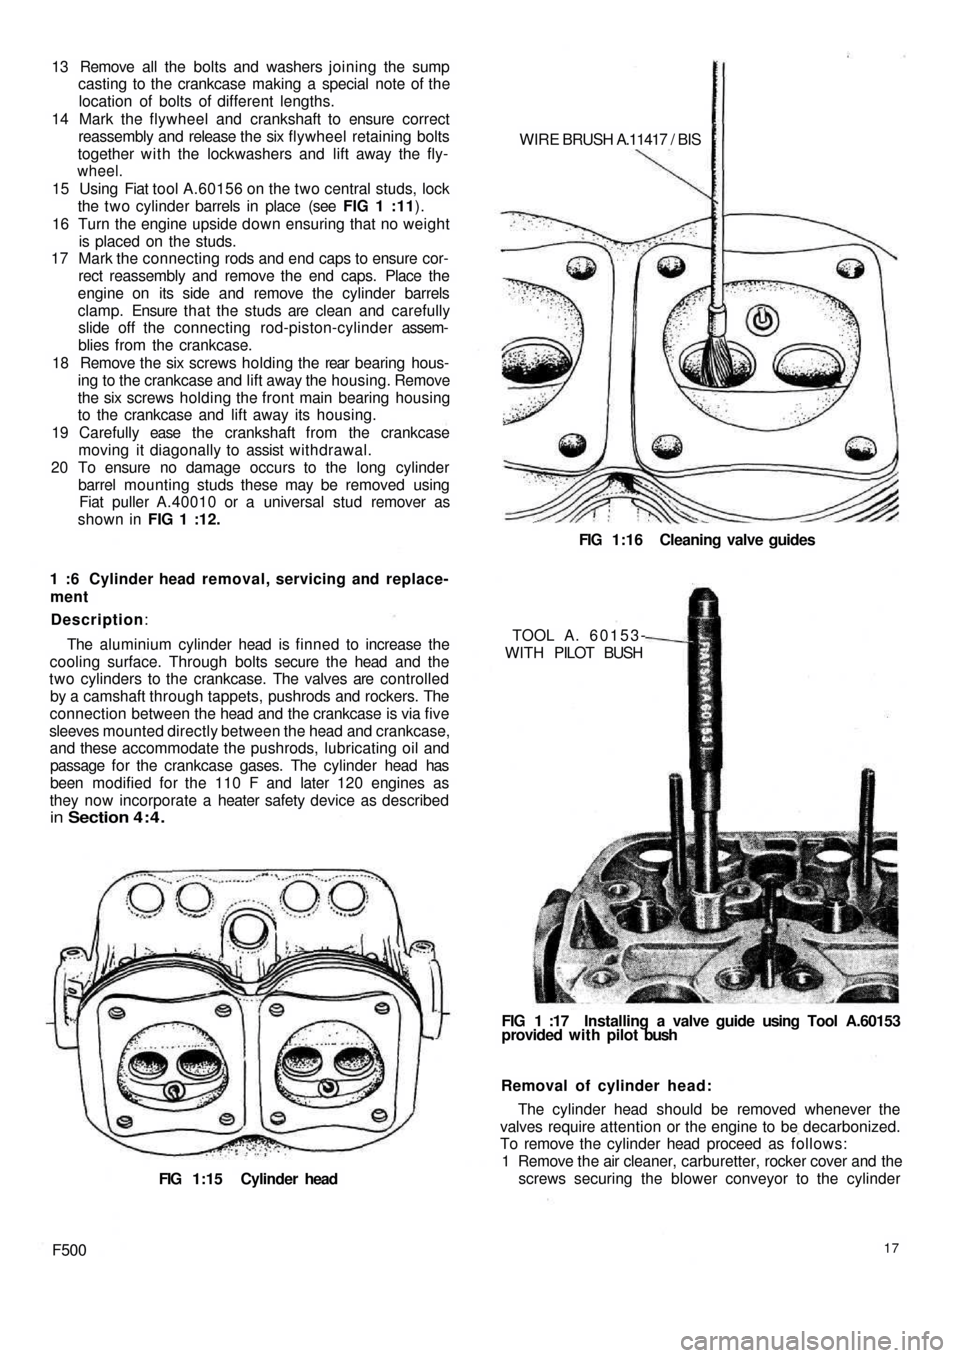 FIAT 500 1969 1.G Workshop Manual 13  Remove all the bolts and washers joining the sump
casting to the crankcase making a special note of the
location of bolts of different lengths.
14 Mark the flywheel and crankshaft to ensure correc